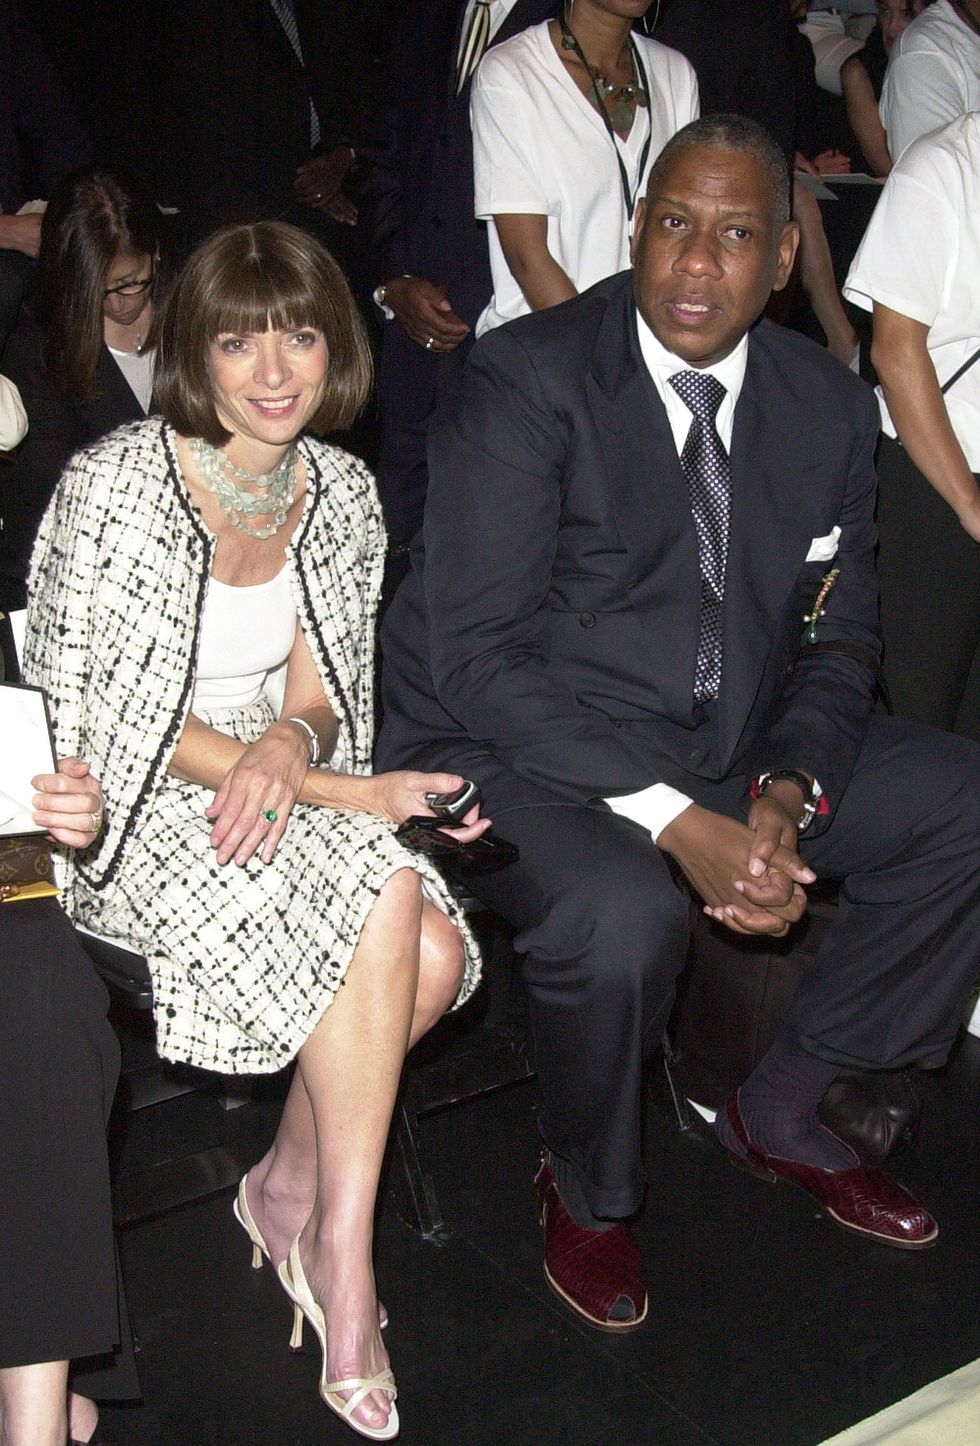 anna wintour and andre leon talley during mercedes benz fashion week spring collections 2003   oscar de la renta show   runway and front row in new york city, new york, united states photo by djamilla rosa cochranwireimage